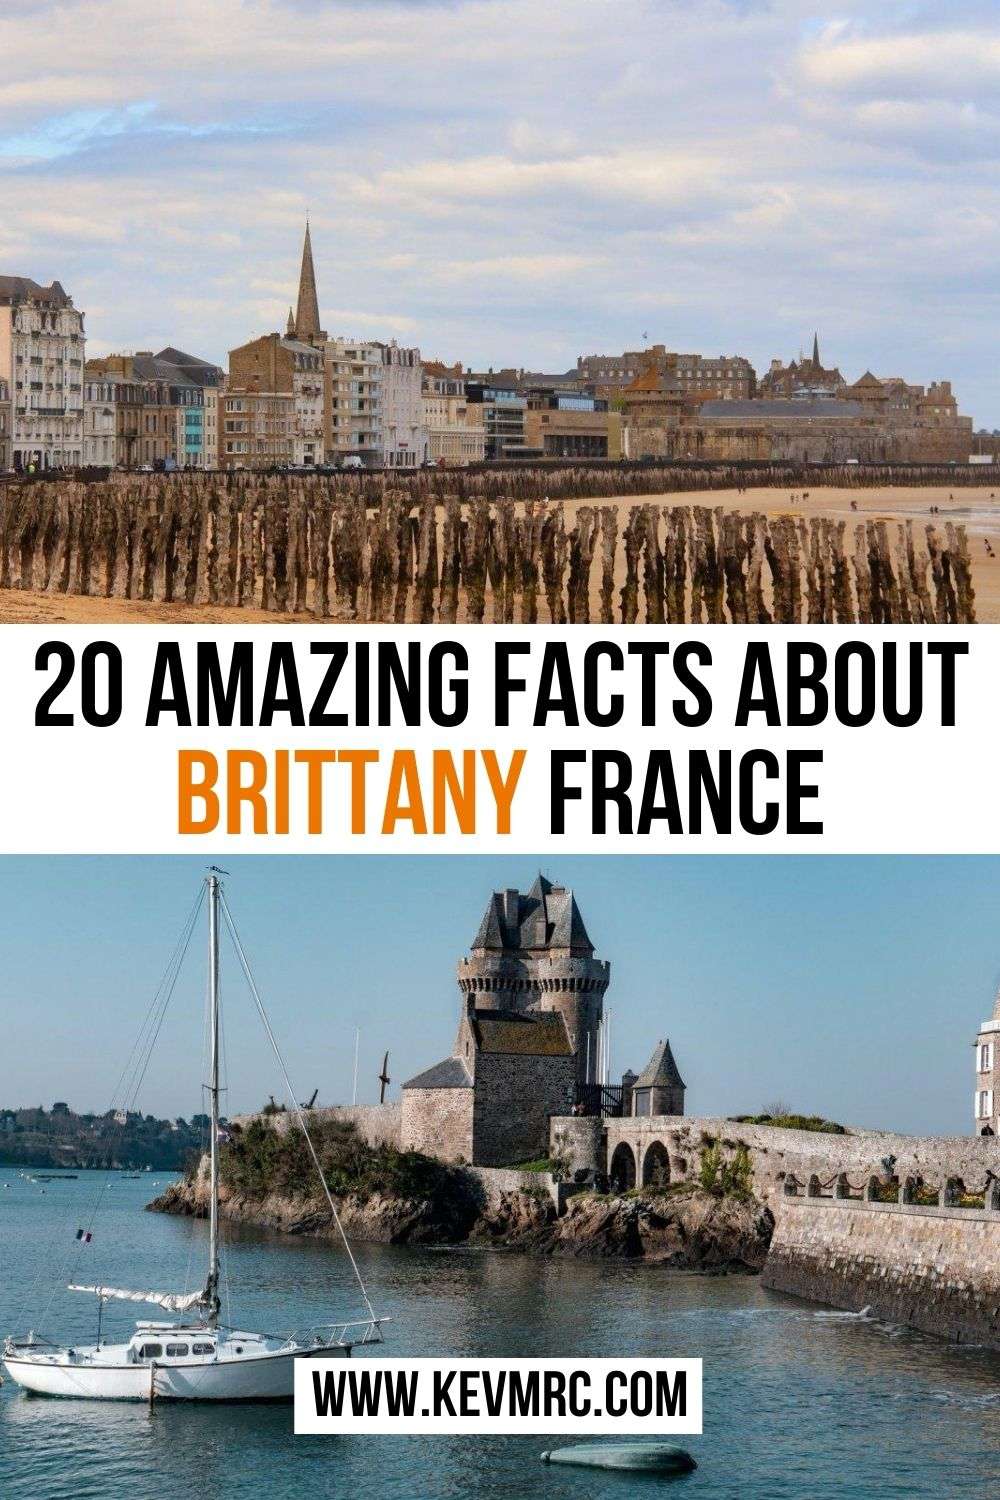 Brittany, a region in the northwest of France, is mostly known for its wild coastline and endless beaches, but also for its strong folklore and traditions. Learn more about this region with the following 20 interesting facts about Brittany France!  did you know facts random | france facts | funny facts about france | france facts for kids